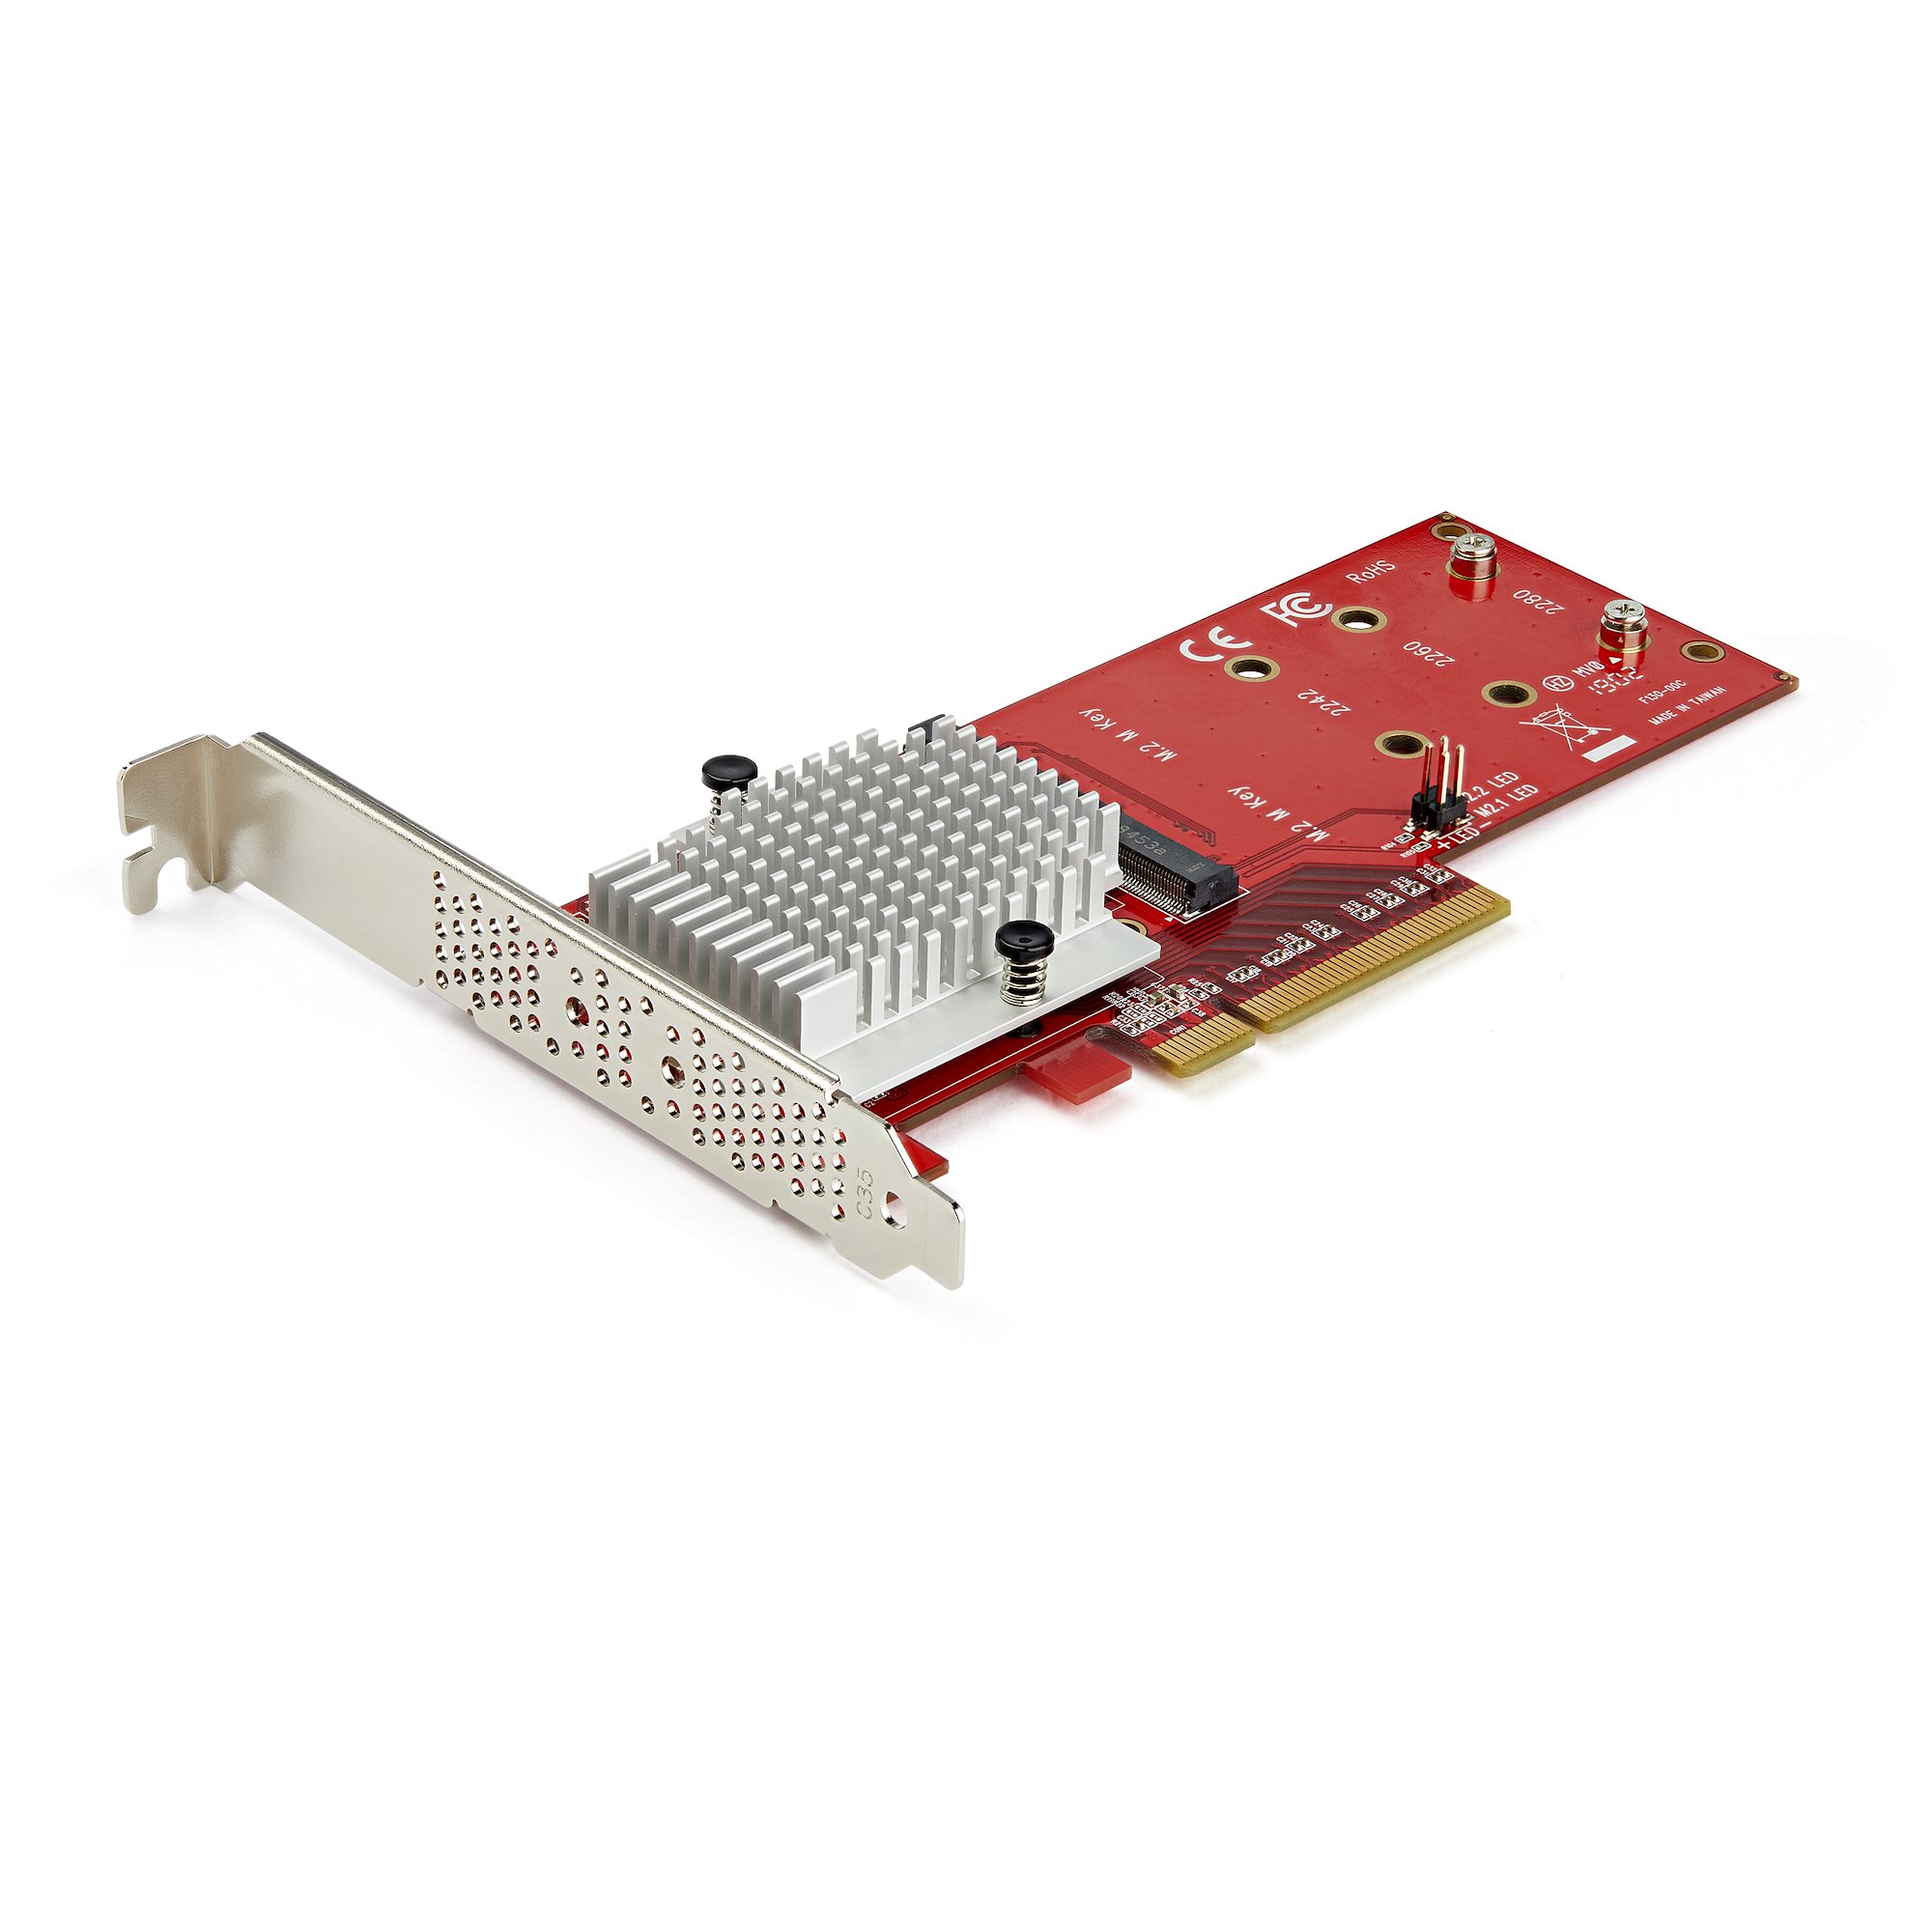 M.2 NVME to PCIe 3.0 x16 Adapter with Aluminum Heatsink Solution NVME SSD to PCI-e 3.0 x 16 Host Controller Expansion Card PCIe-NVMe & PCIe-AHCI 